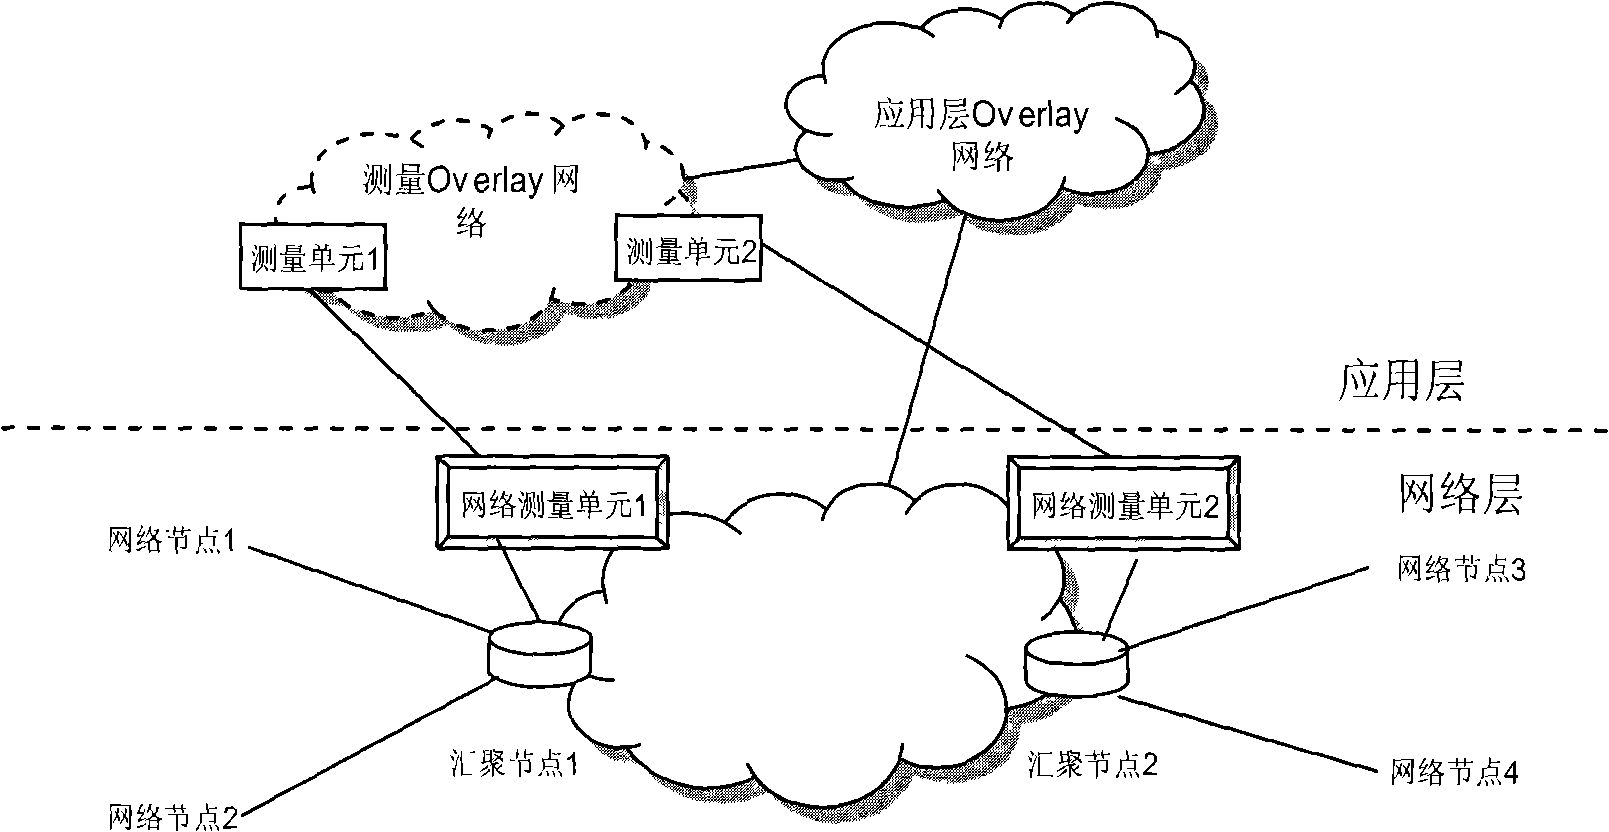 Method, device and system for measuring network performance between Overlay nodes